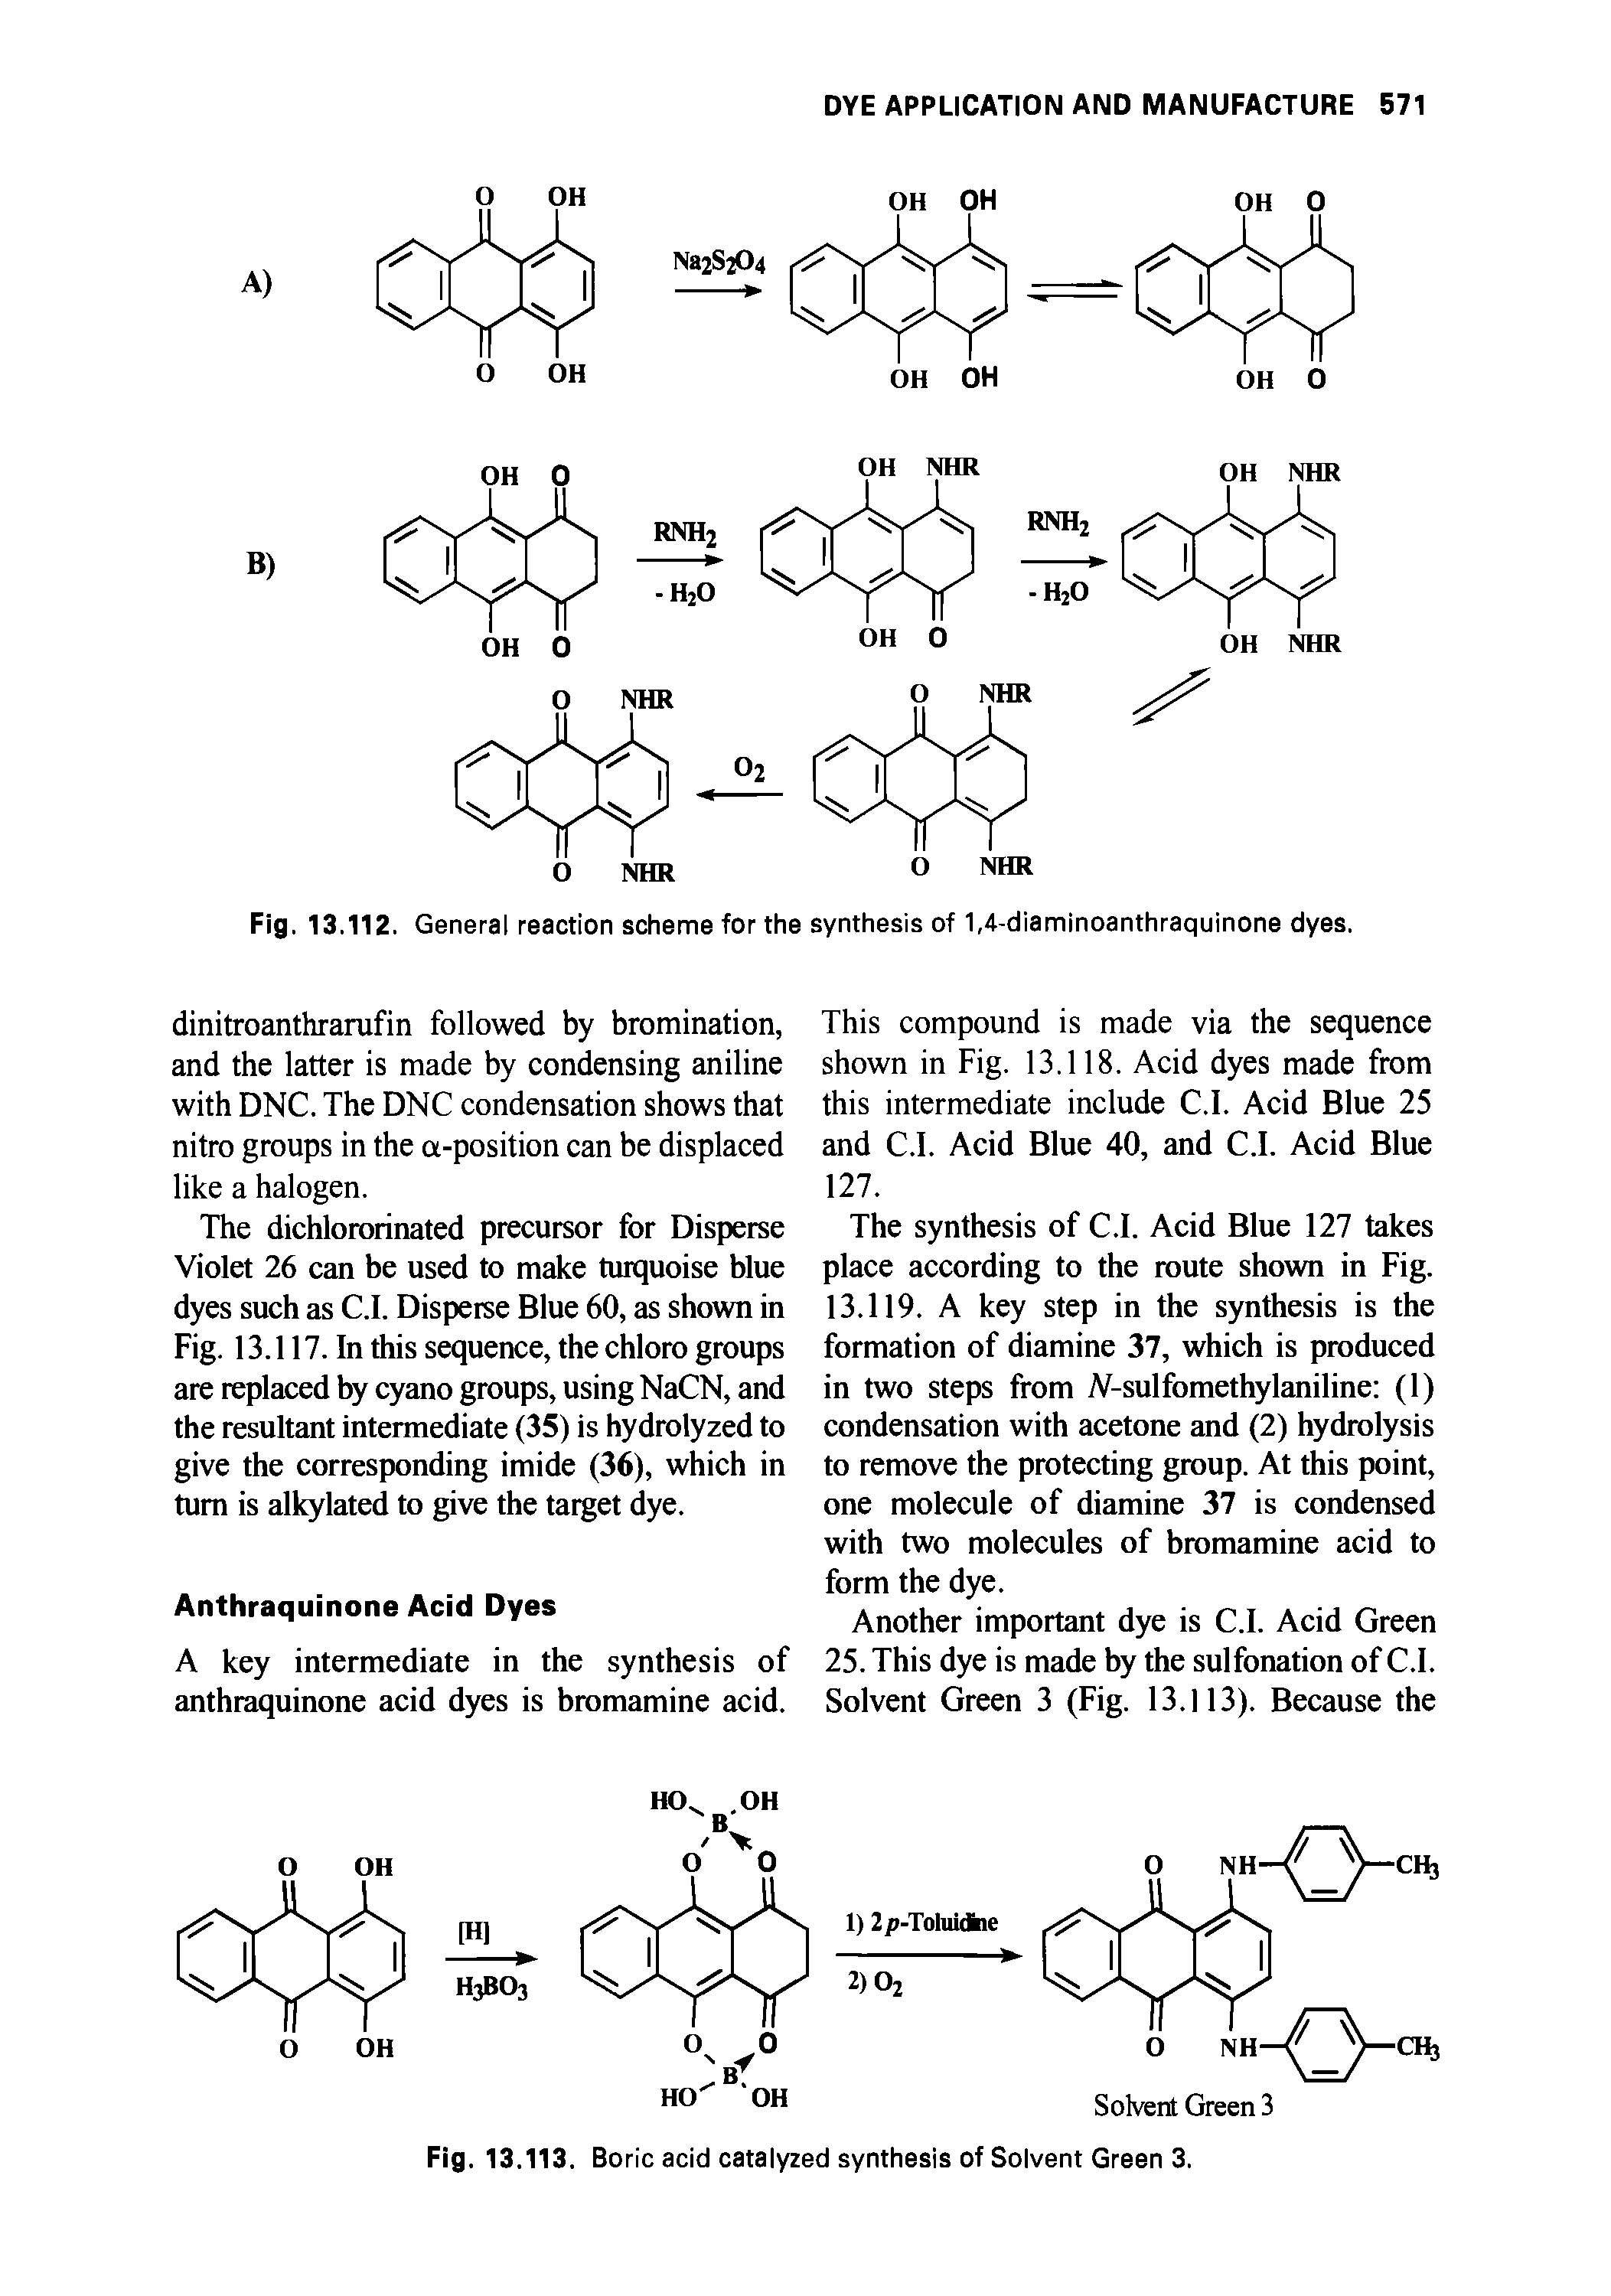 Fig. 13.113. Boric acid catalyzed synthesis of Solvent Green 3.